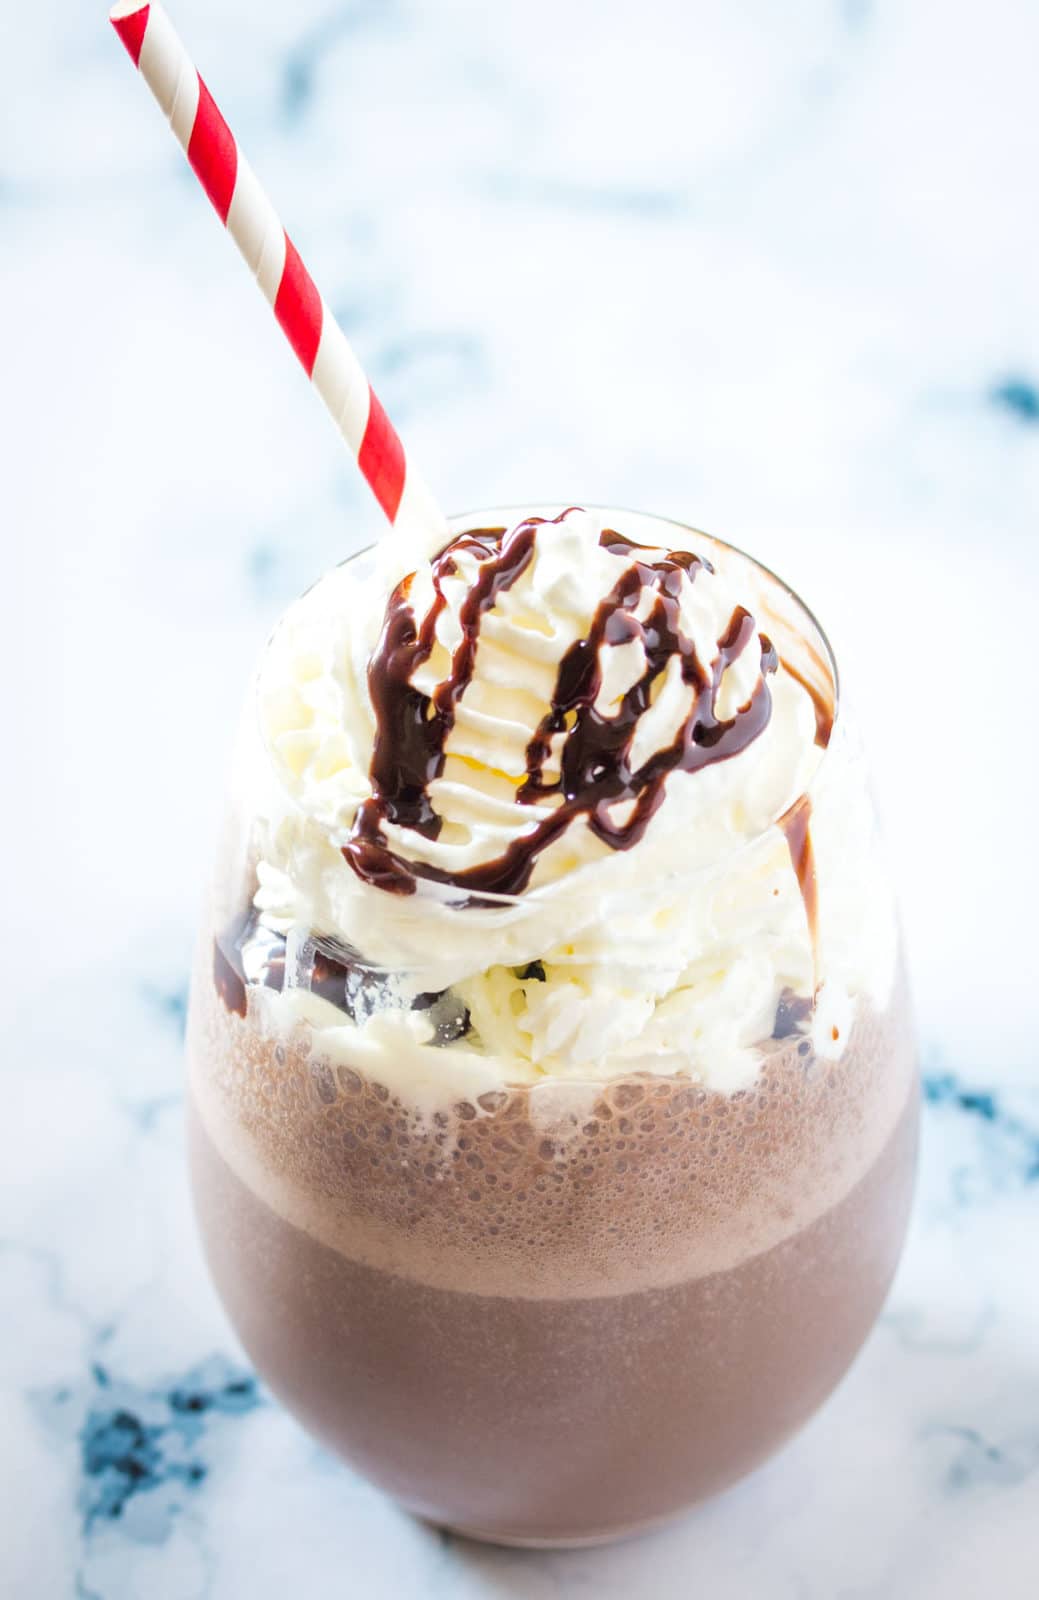 Chocolate banana milkshake in a round glass topped with whipped cream and syrup.